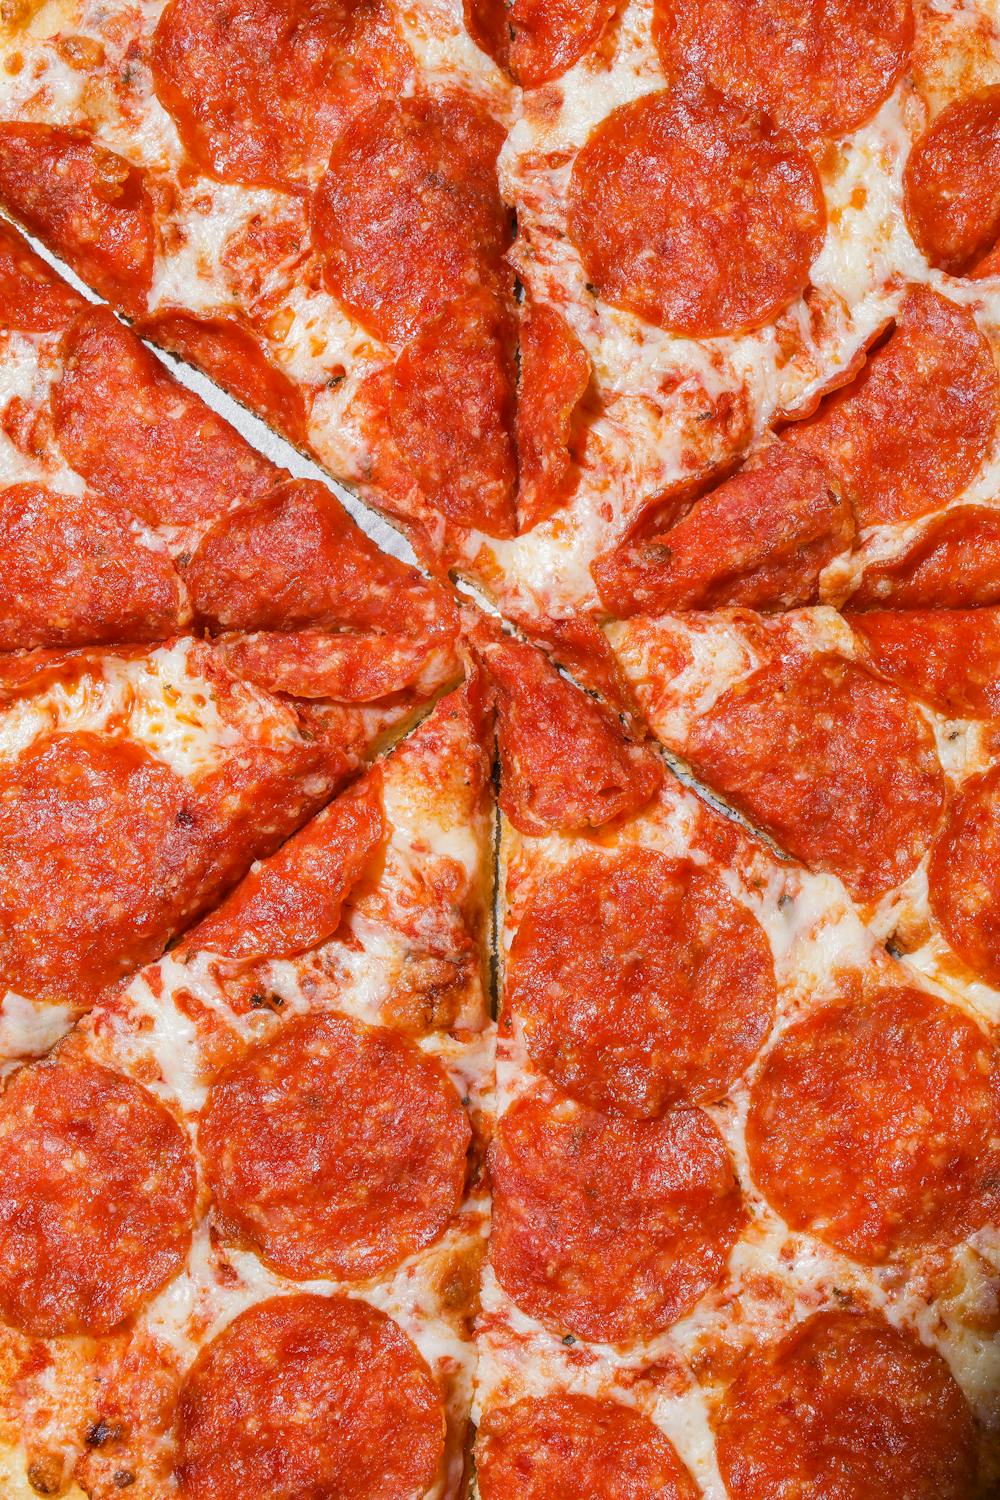 Sliced Pepperoni Pizza In Close-up View · Free Stock Photo